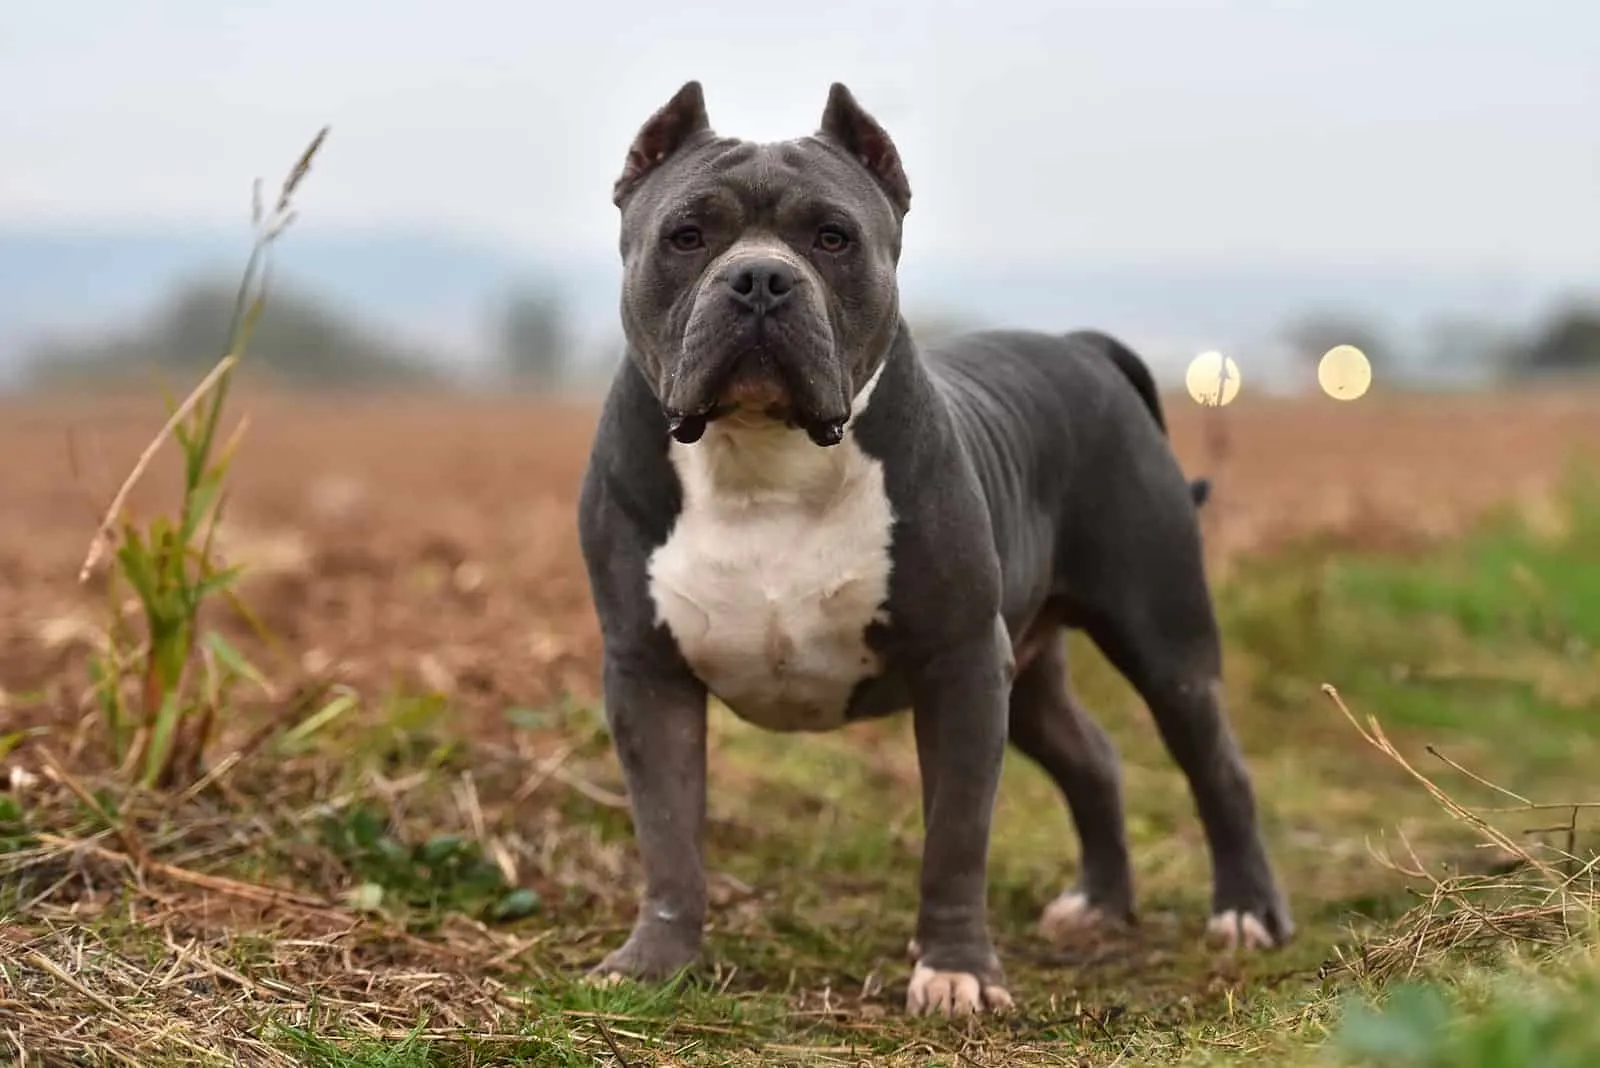 American Bully stands in the park